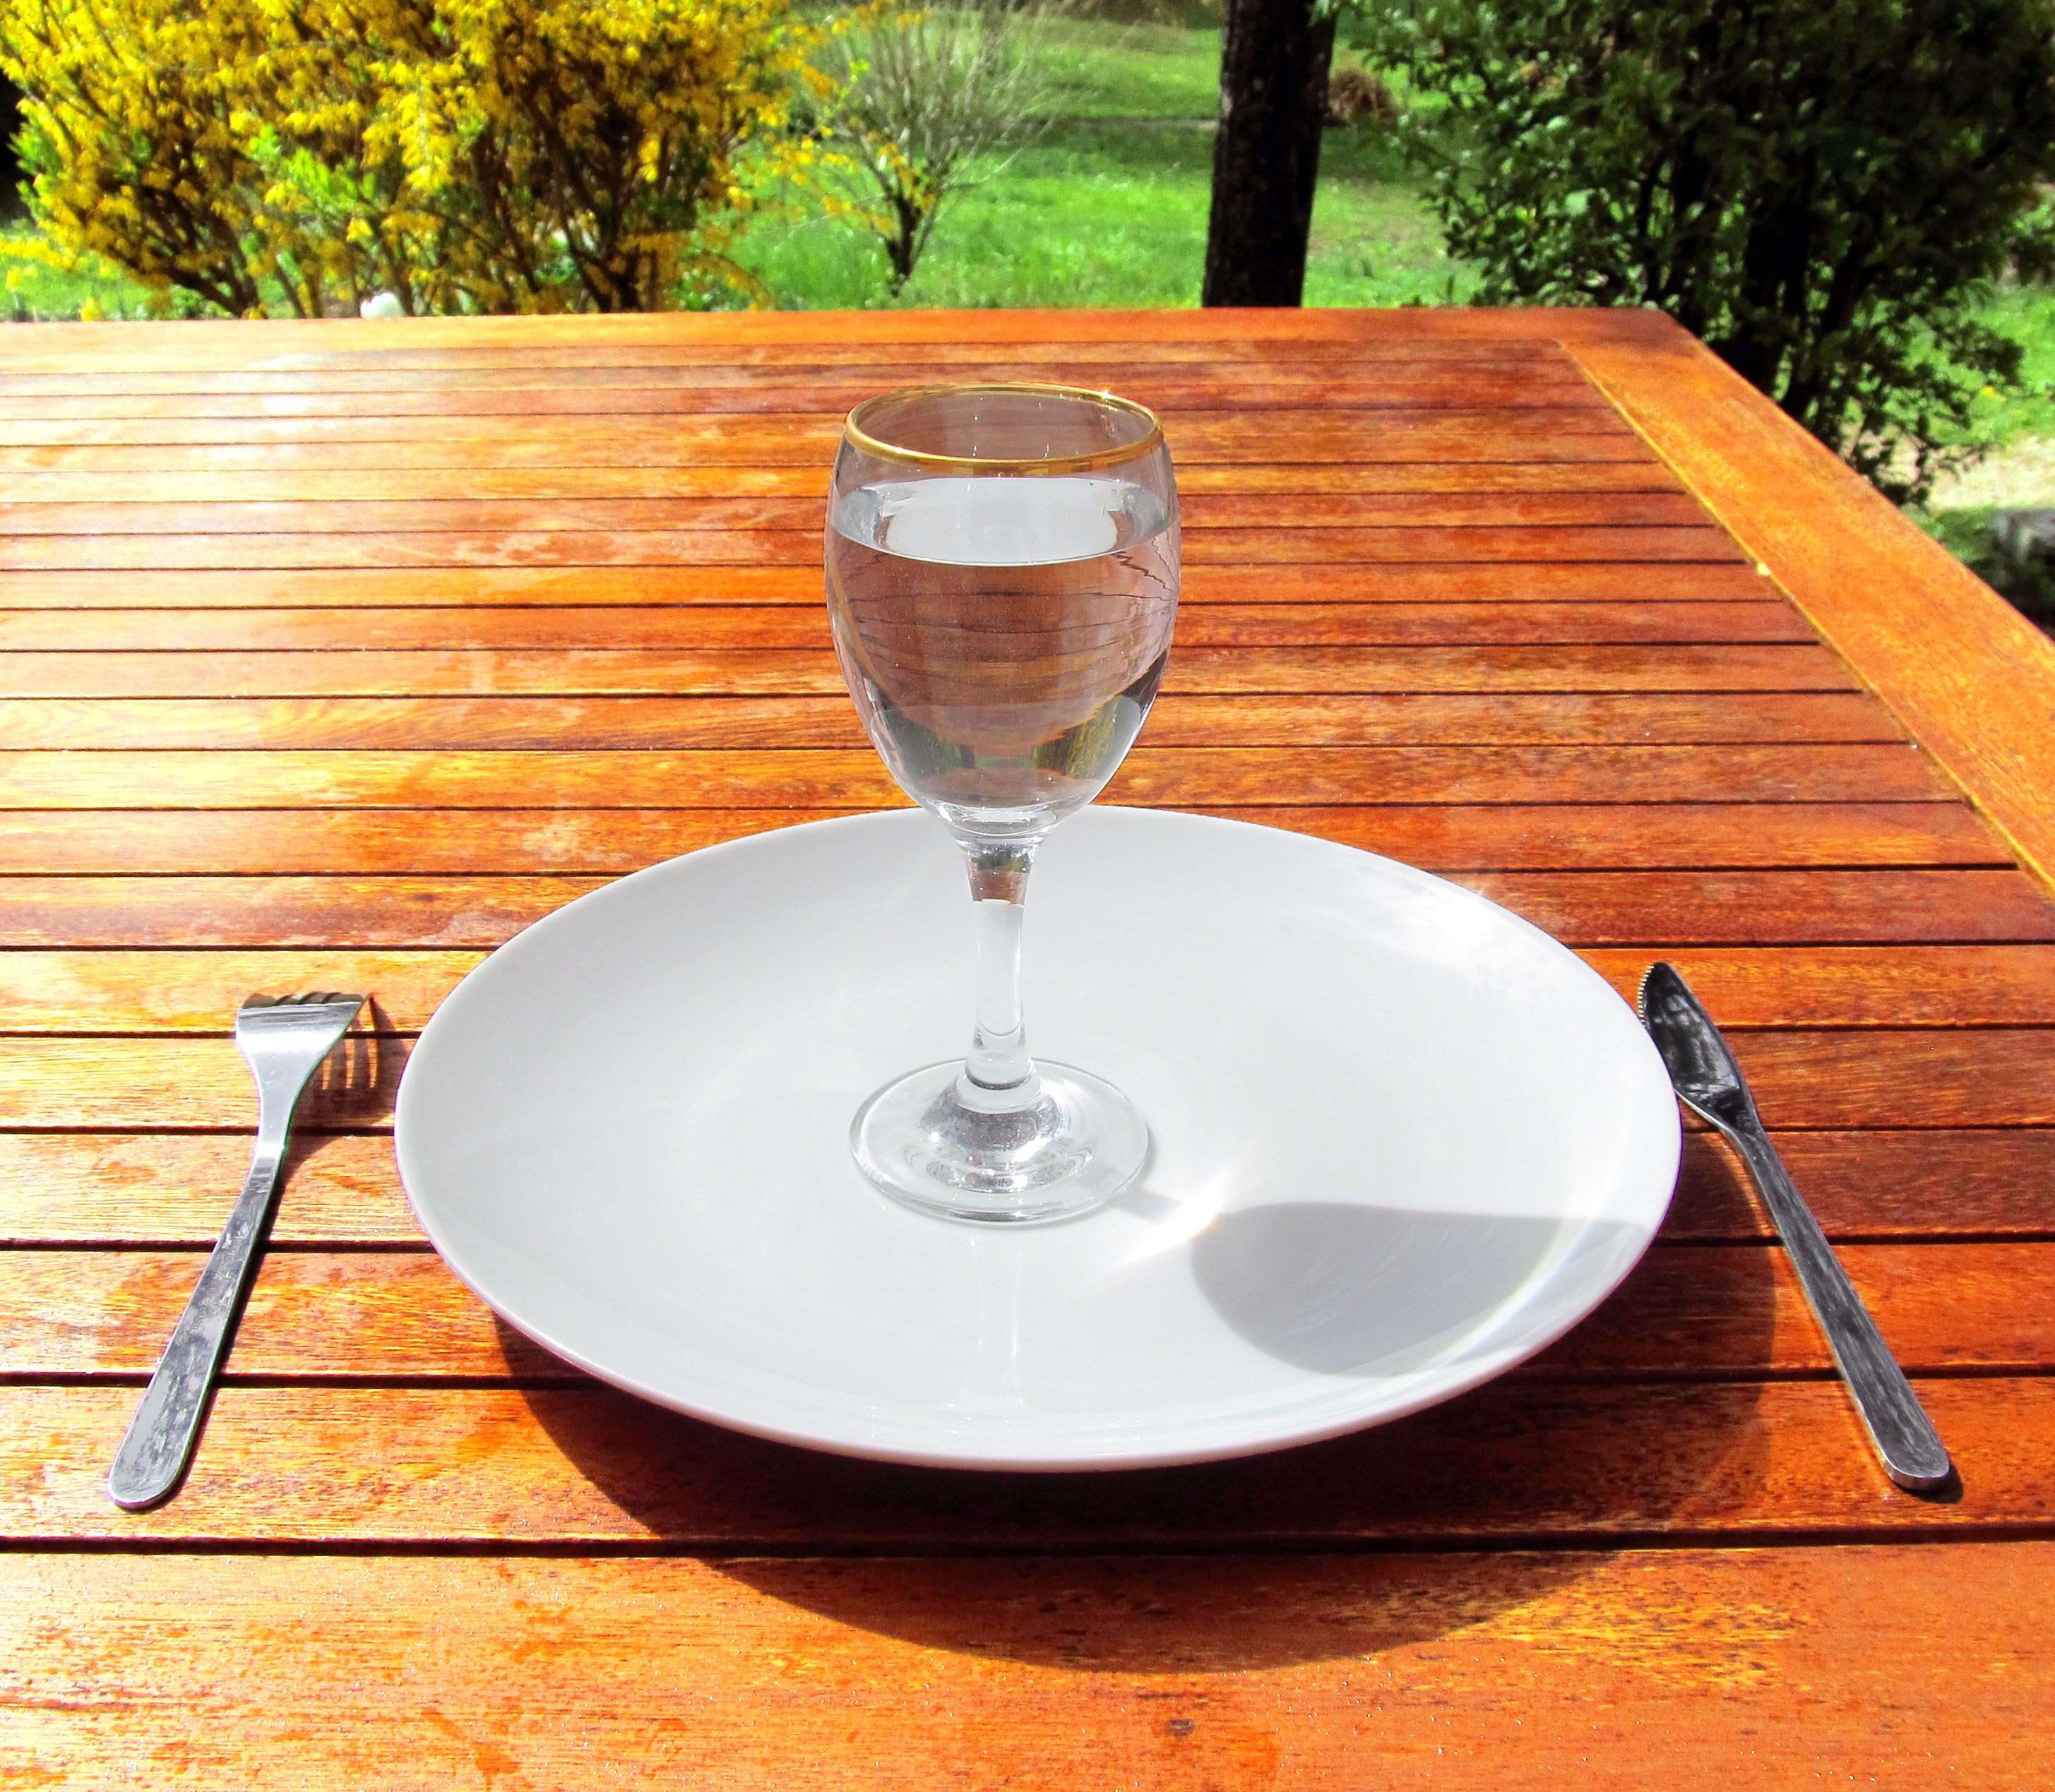 Give yourself an energy boost with intermittent fasting